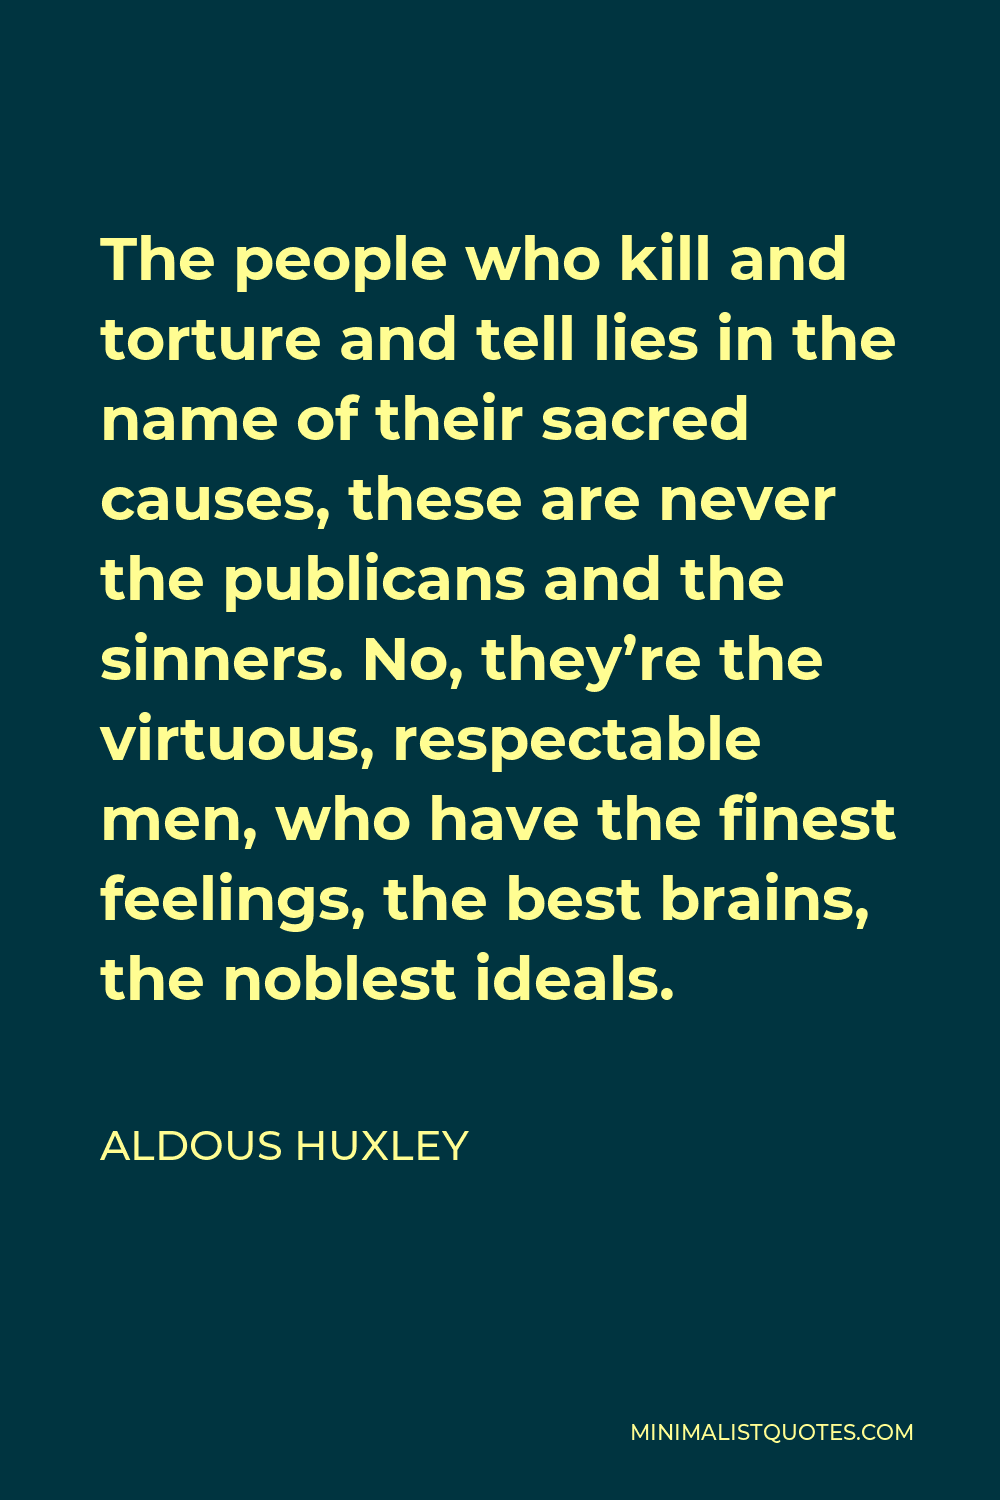 Aldous Huxley Quote - The people who kill and torture and tell lies in the name of their sacred causes, these are never the publicans and the sinners. No, they’re the virtuous, respectable men, who have the finest feelings, the best brains, the noblest ideals.